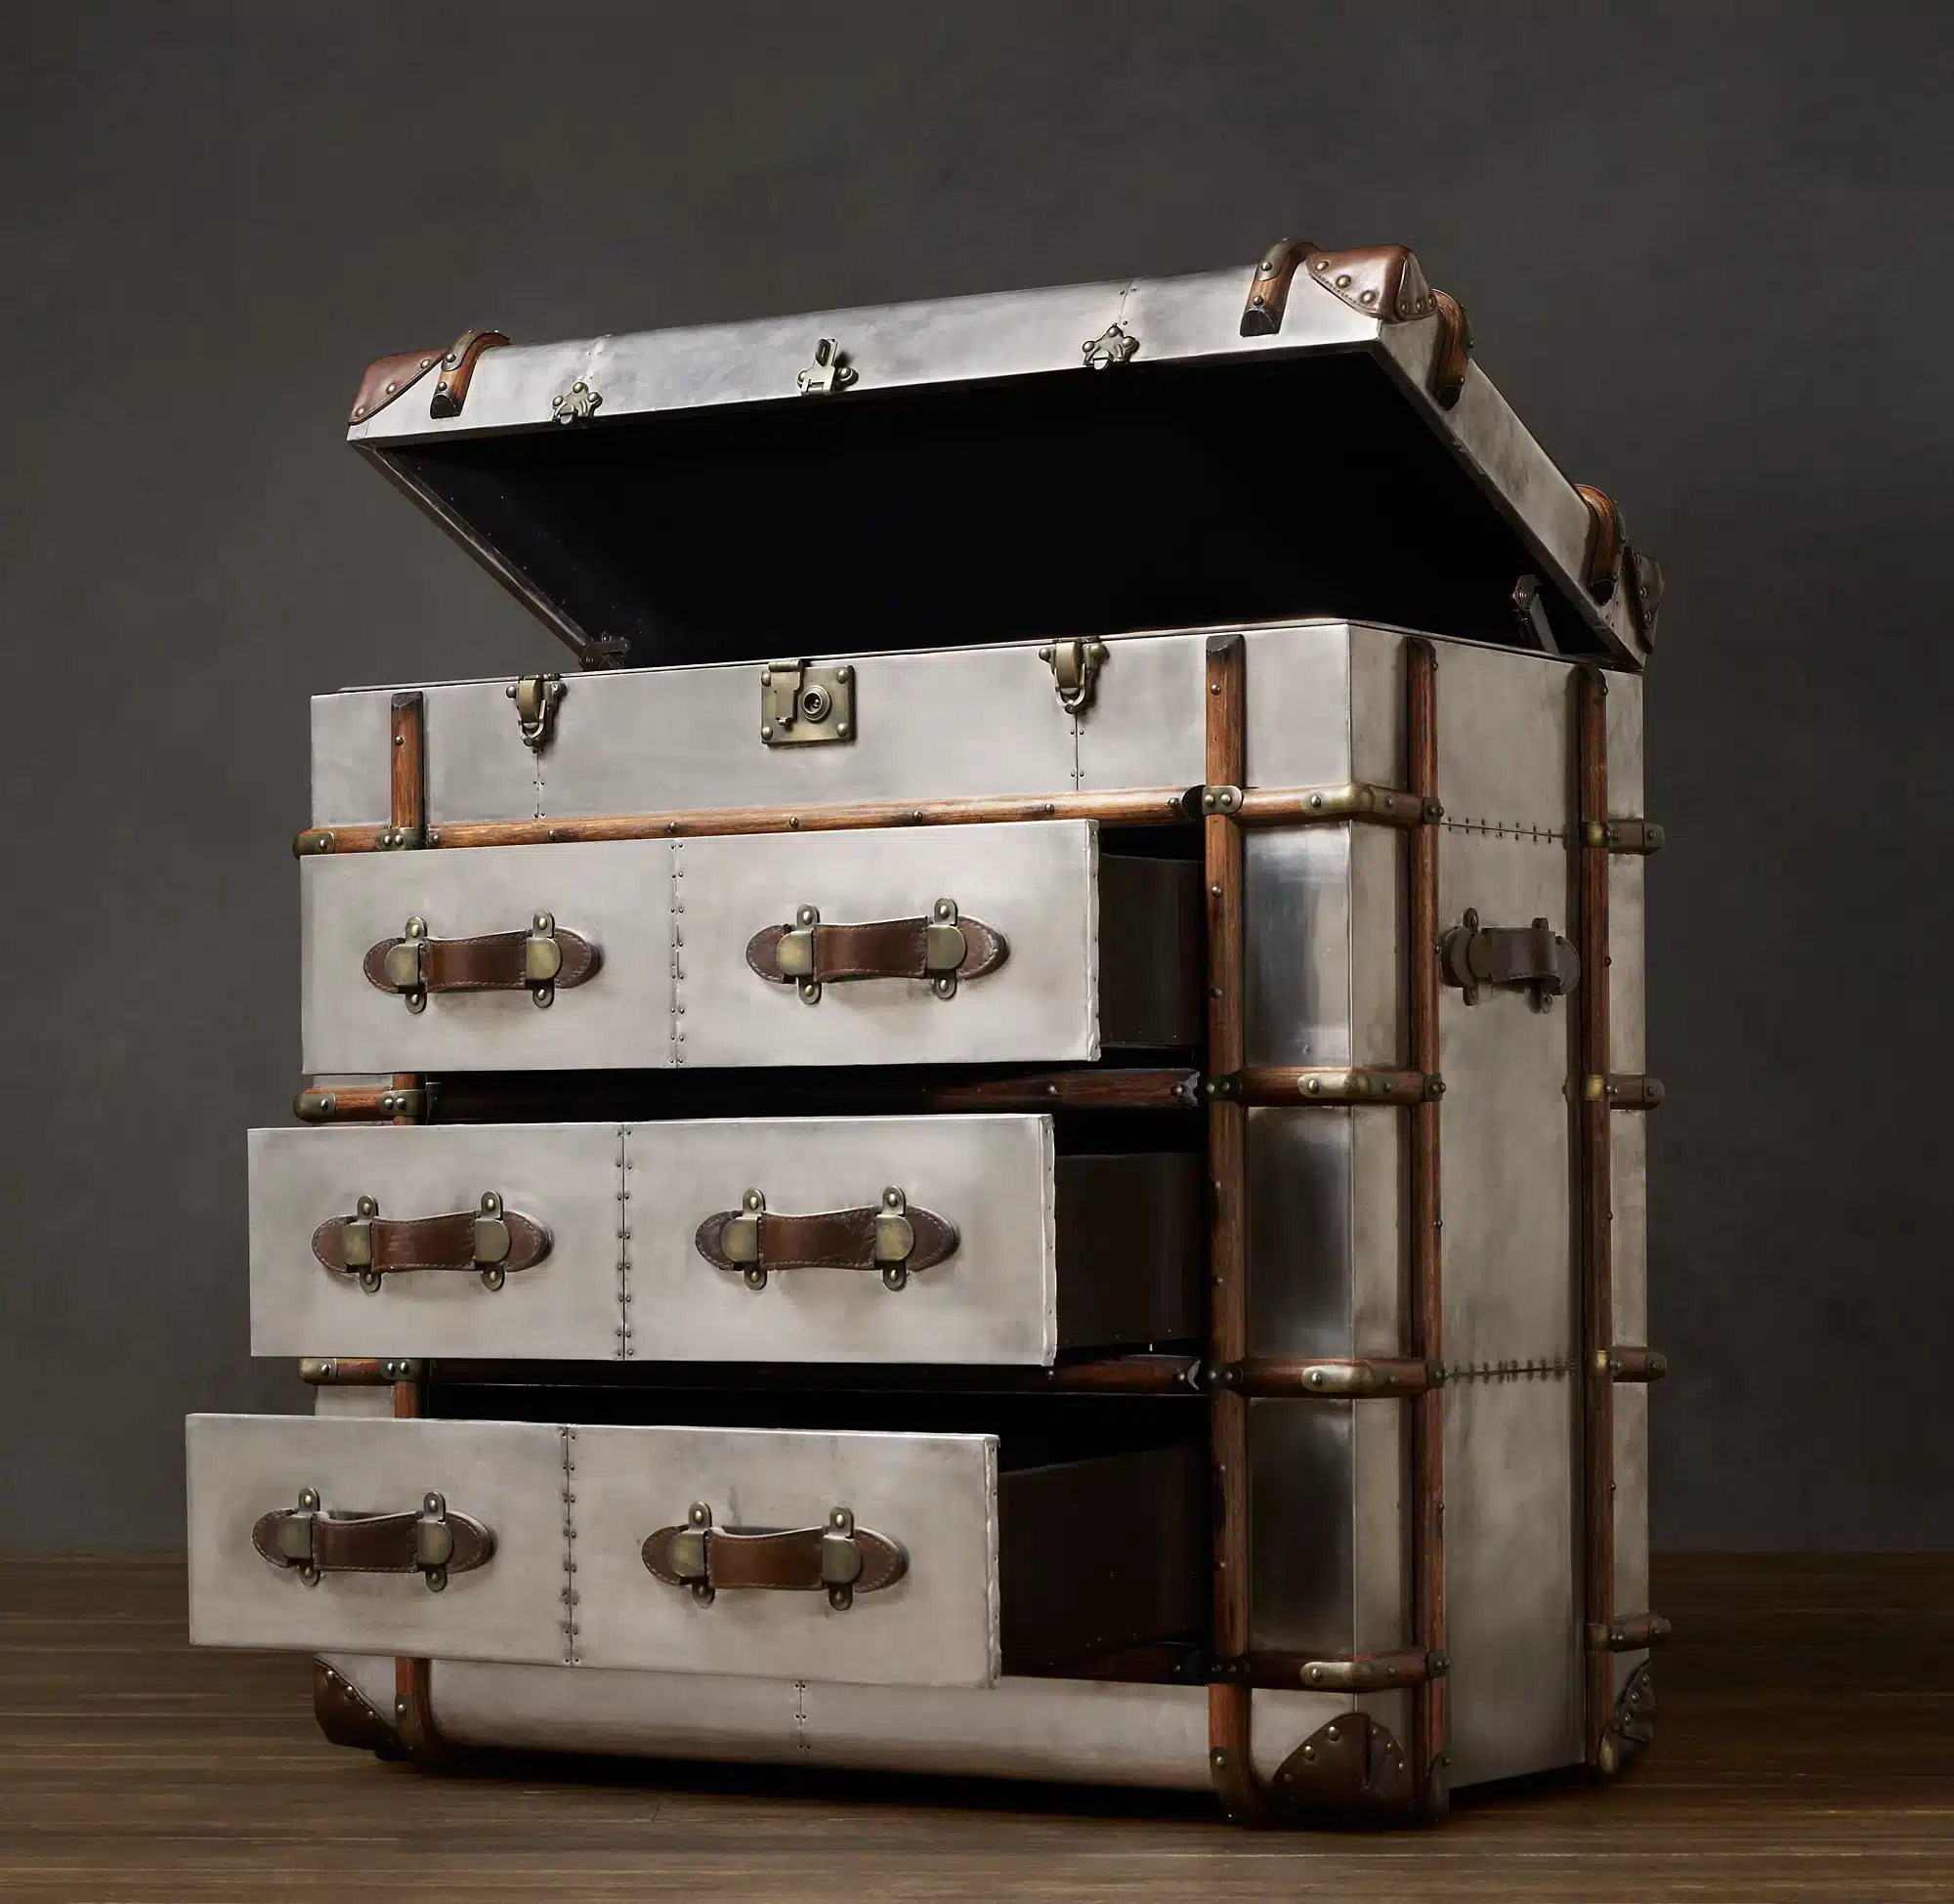 The Aviator chest is inspired by a worn, custom-made steamer Trunk.